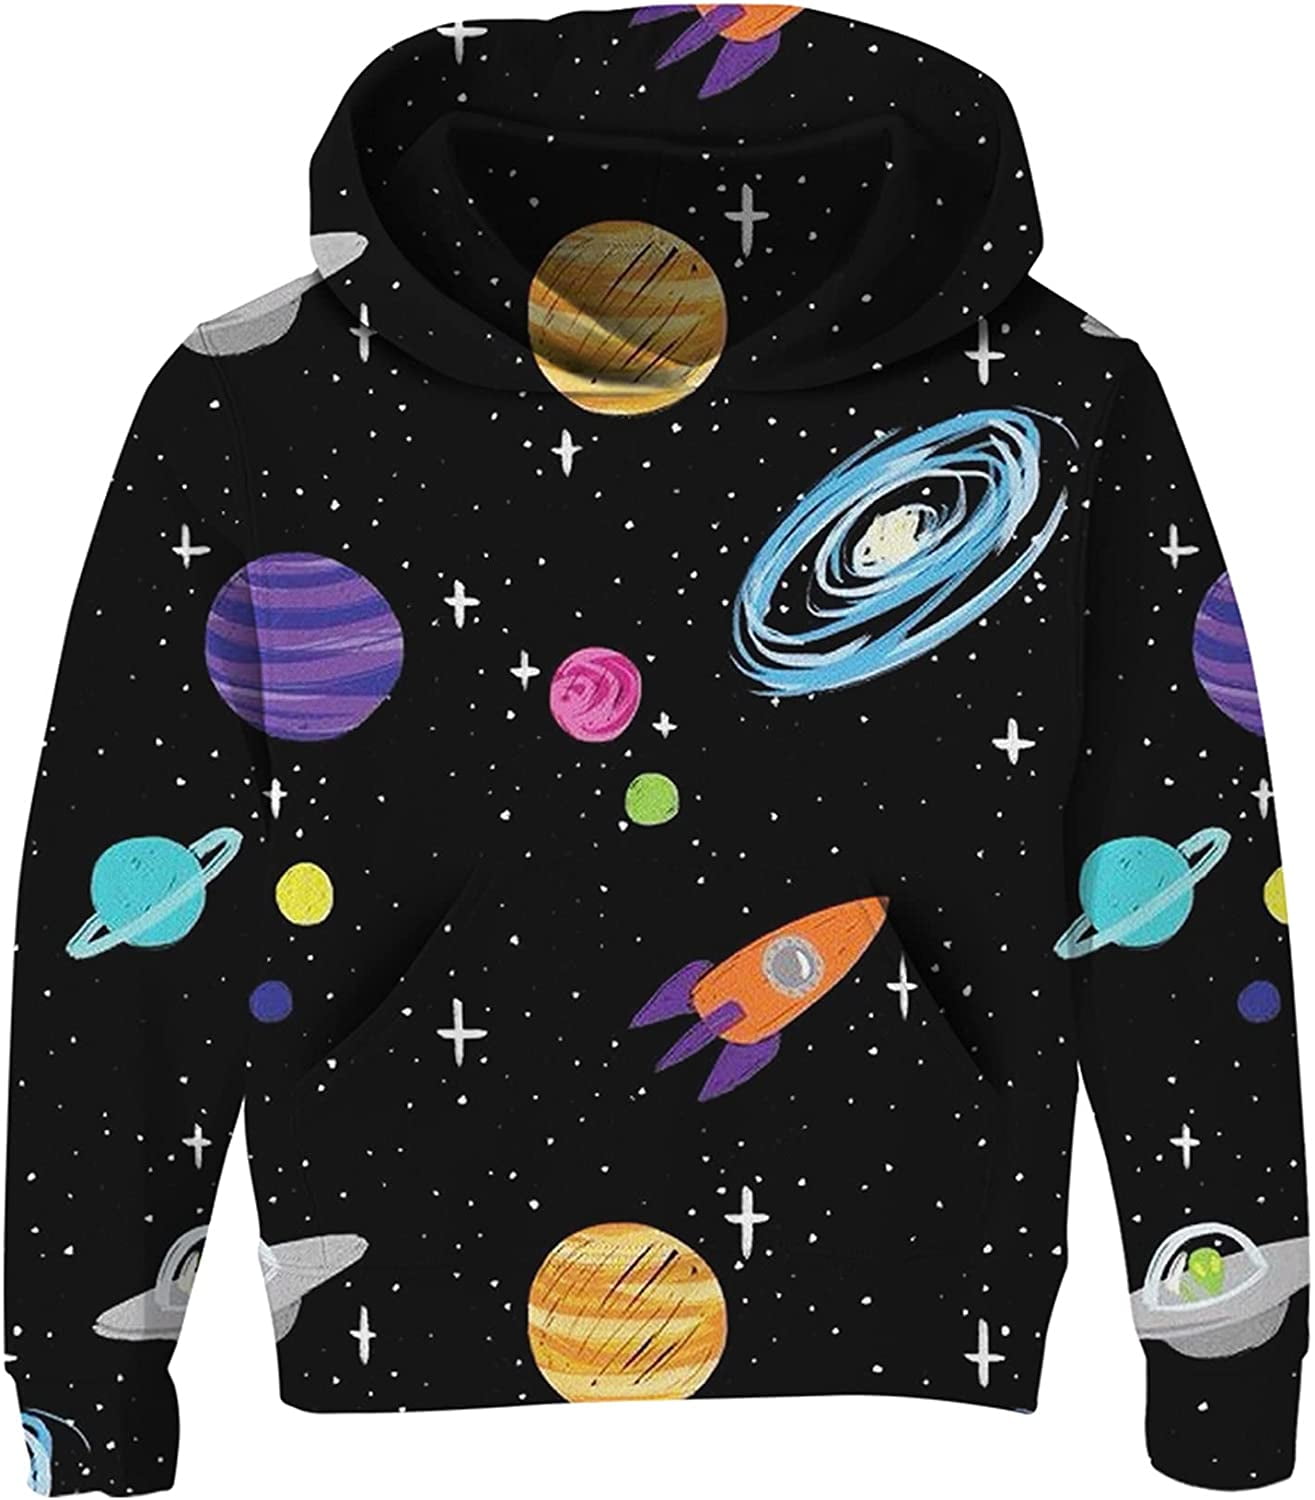 Unisex Hoodies for Kids 3D Prints Sweatshirts Pullover with Pocket for 7-15 Years